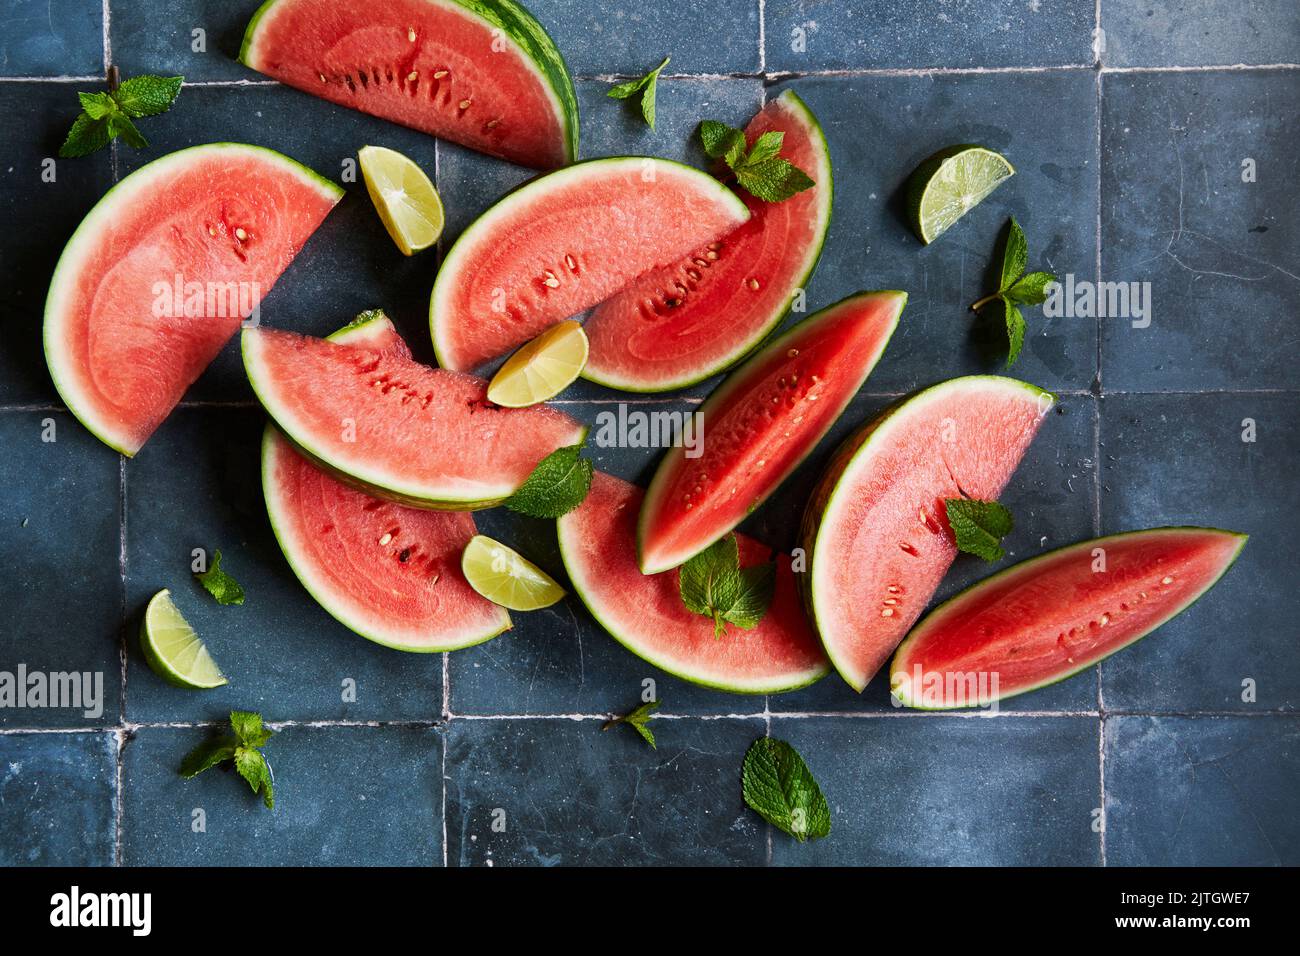 Watermelon slices with mint & lime on blue tiles Stock Photo